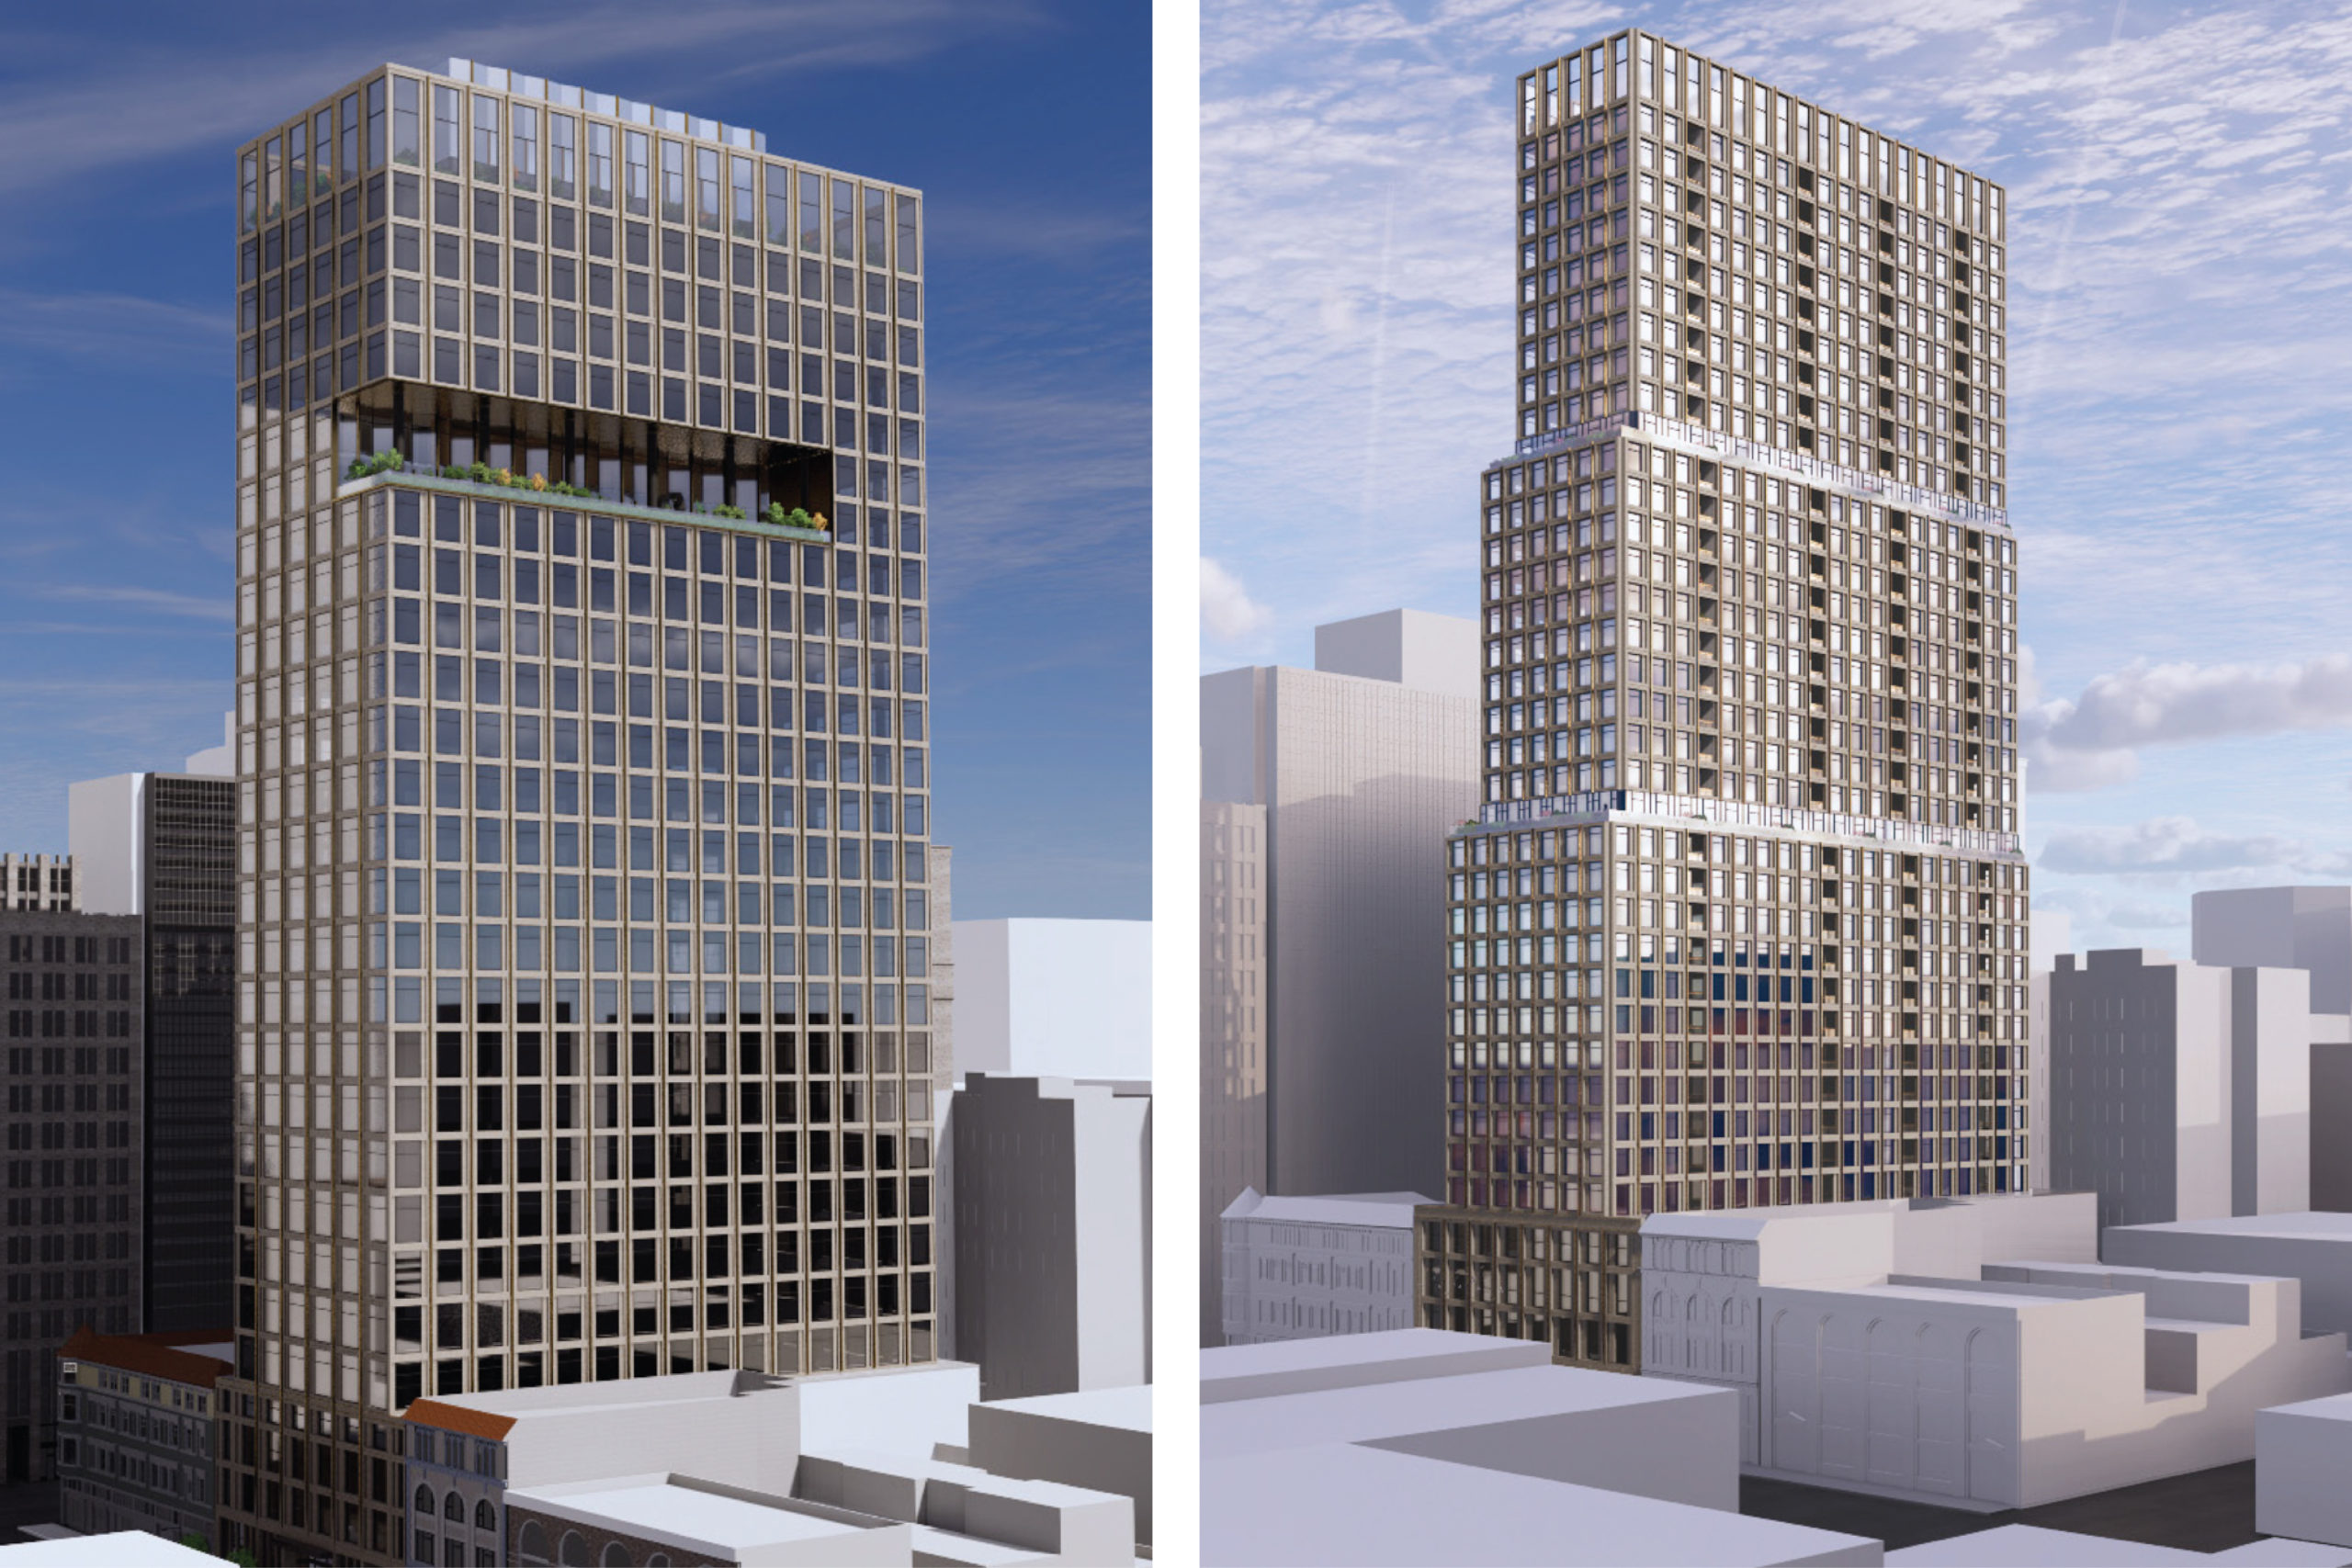 1431 Franklin Street office version (left) and residential version (right), rendering by LARGE Architecture